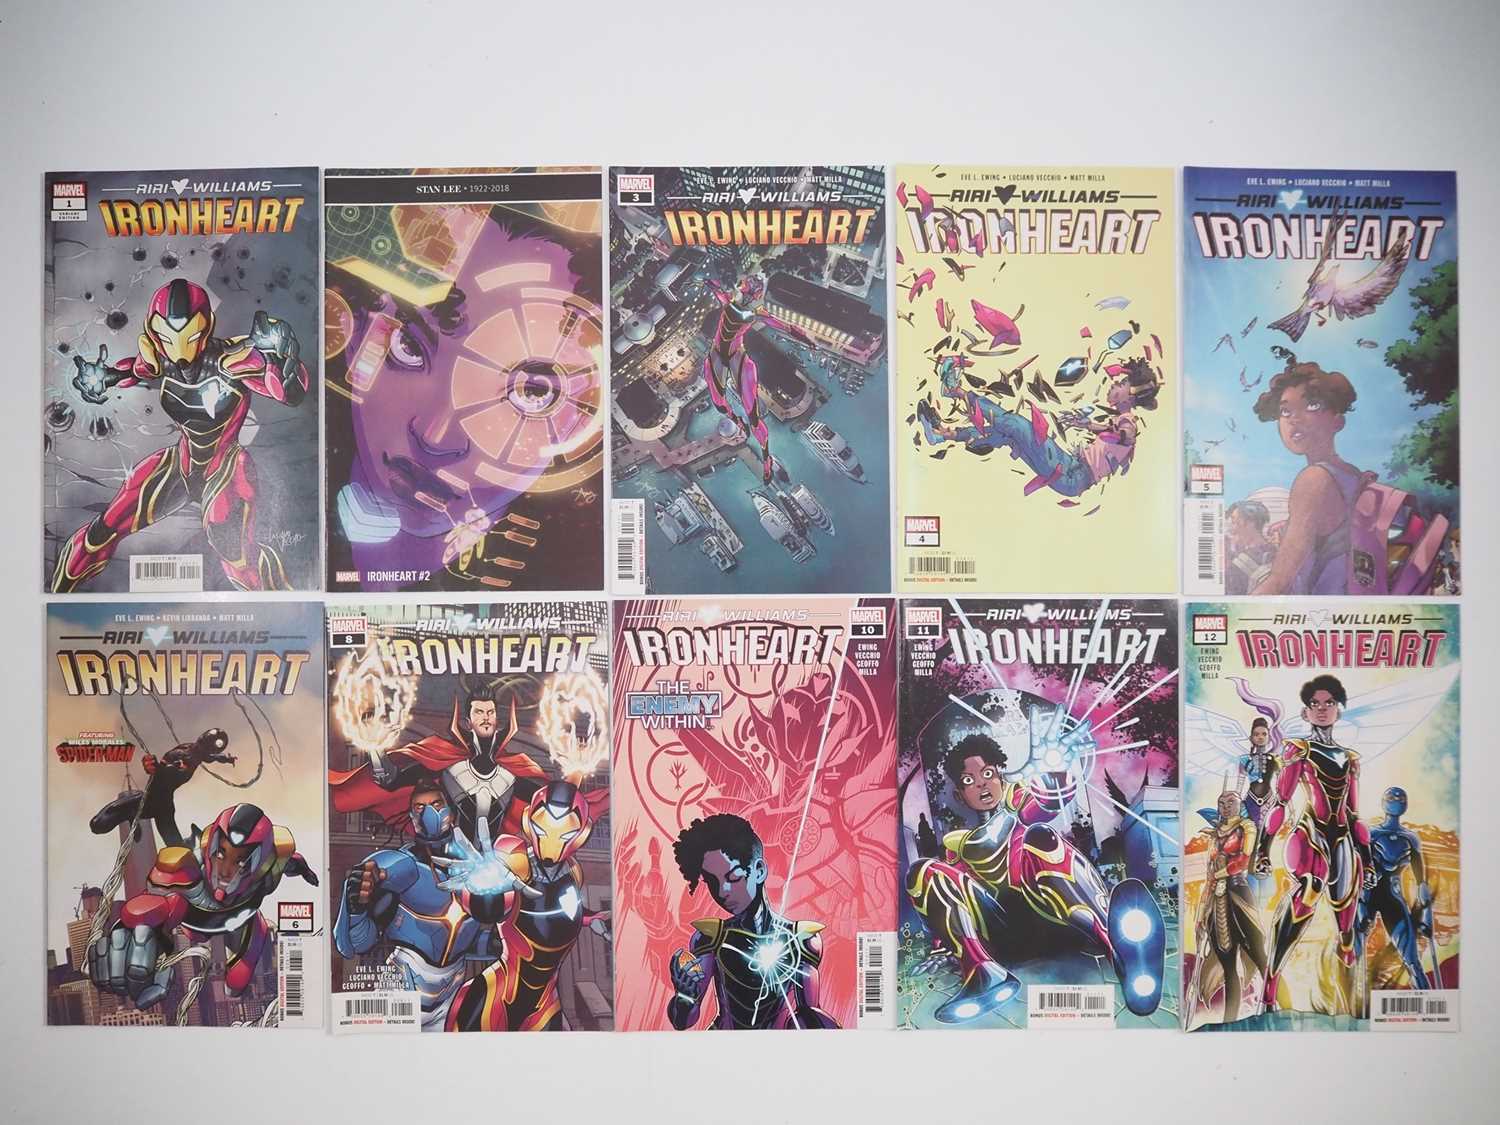 IRONHEART #1, 2, 3, 4, 5, 6, 8, 10, 11, 12 (10 in Lot) - (2019/2020 - MARVEL) - First solo series